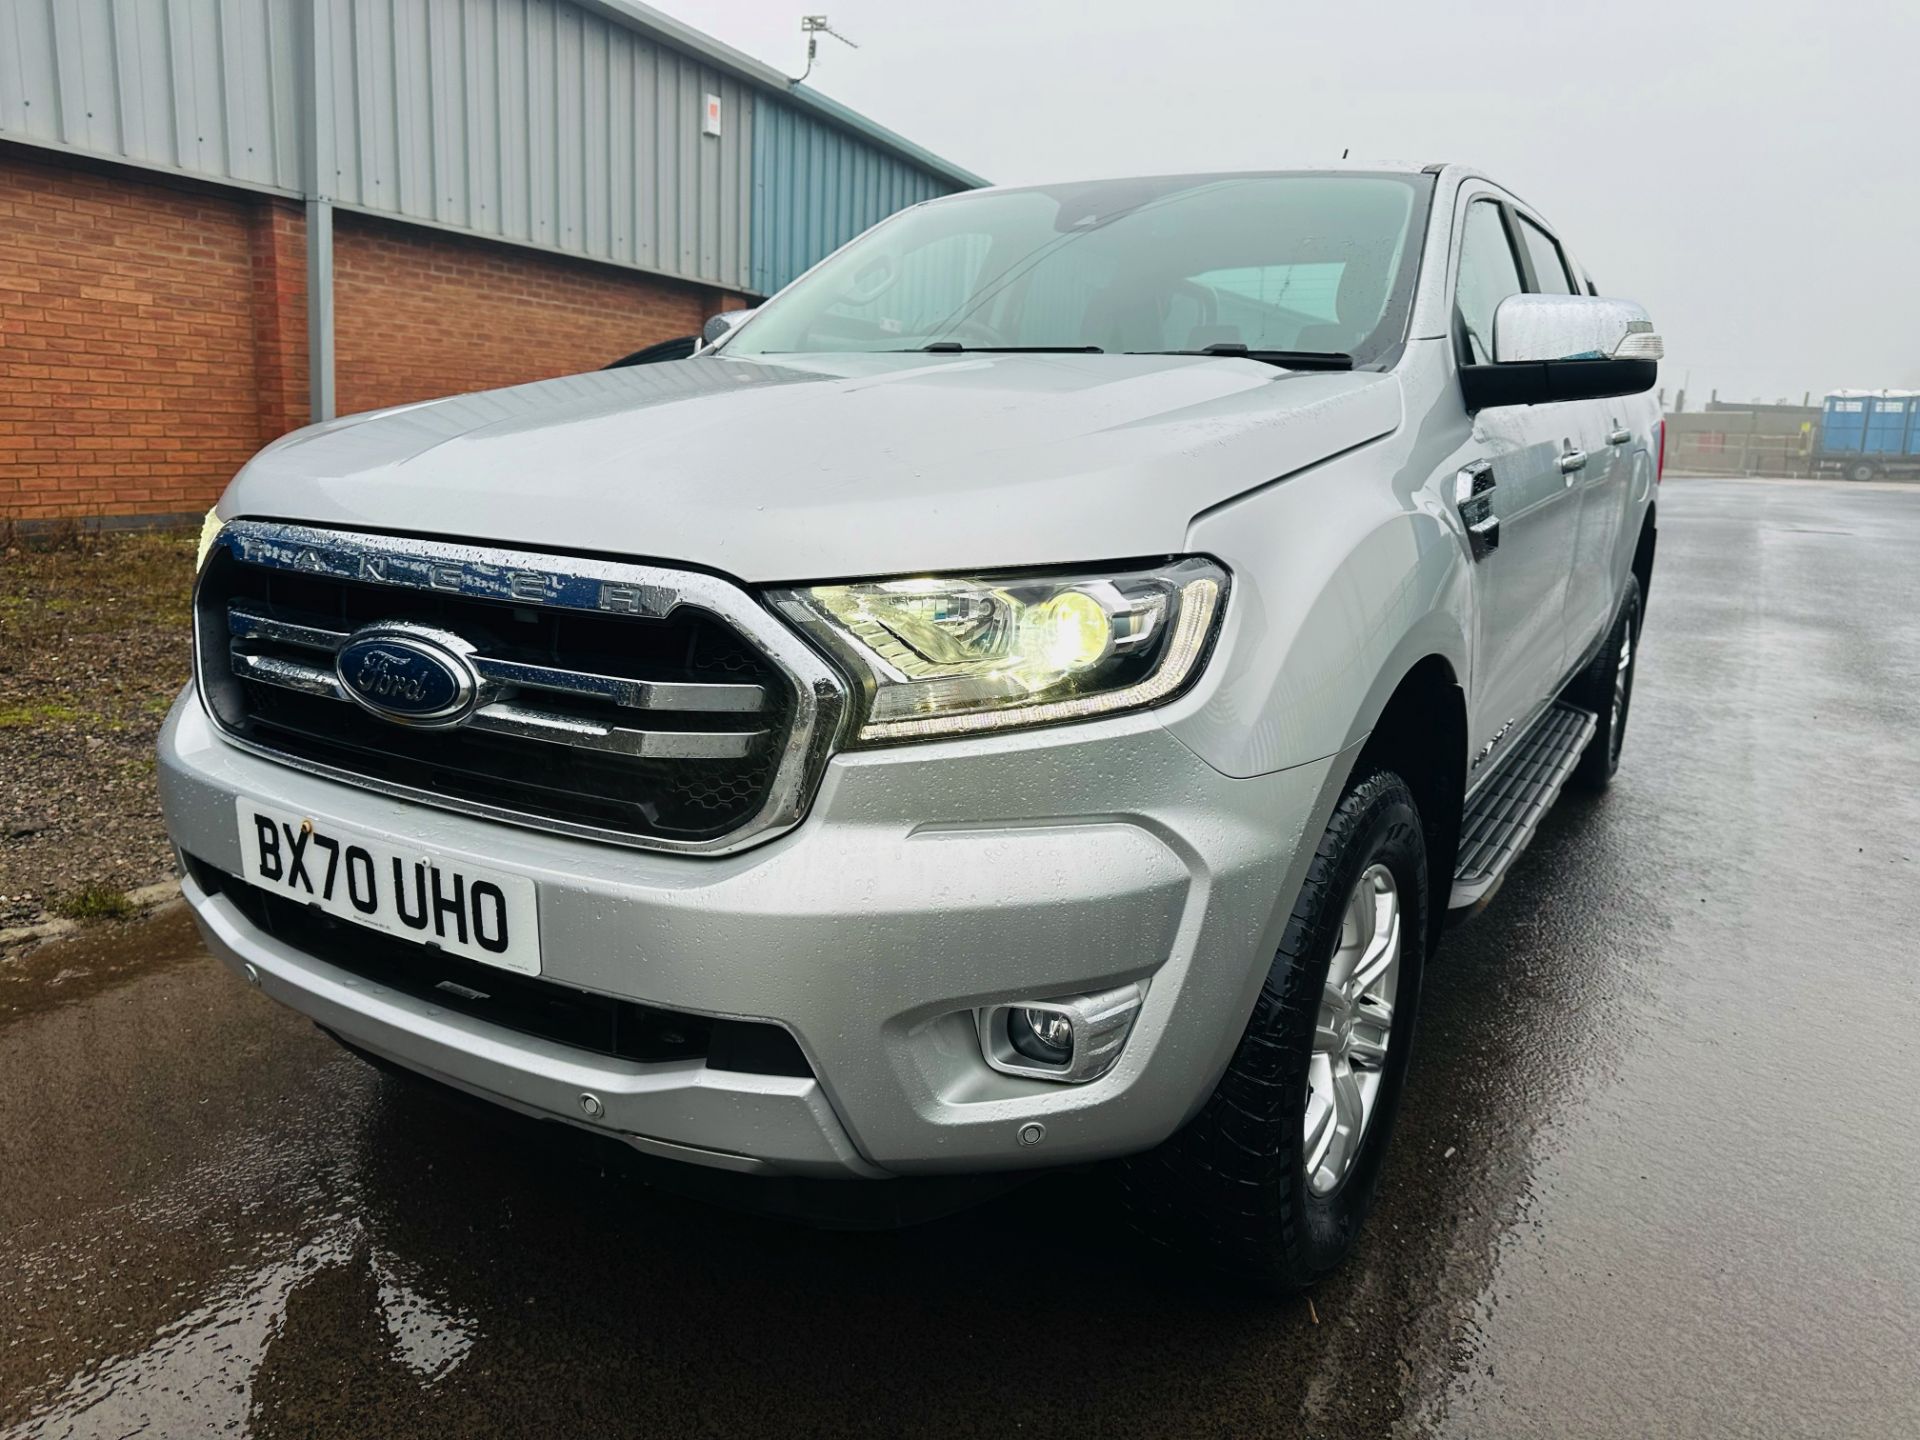 Ford Ranger 2.0 TDCI LIMITED 170BHP Auto SS (2021 Model) Huge Spec -Sat Nav Leather 35k Miles Only - Image 5 of 44